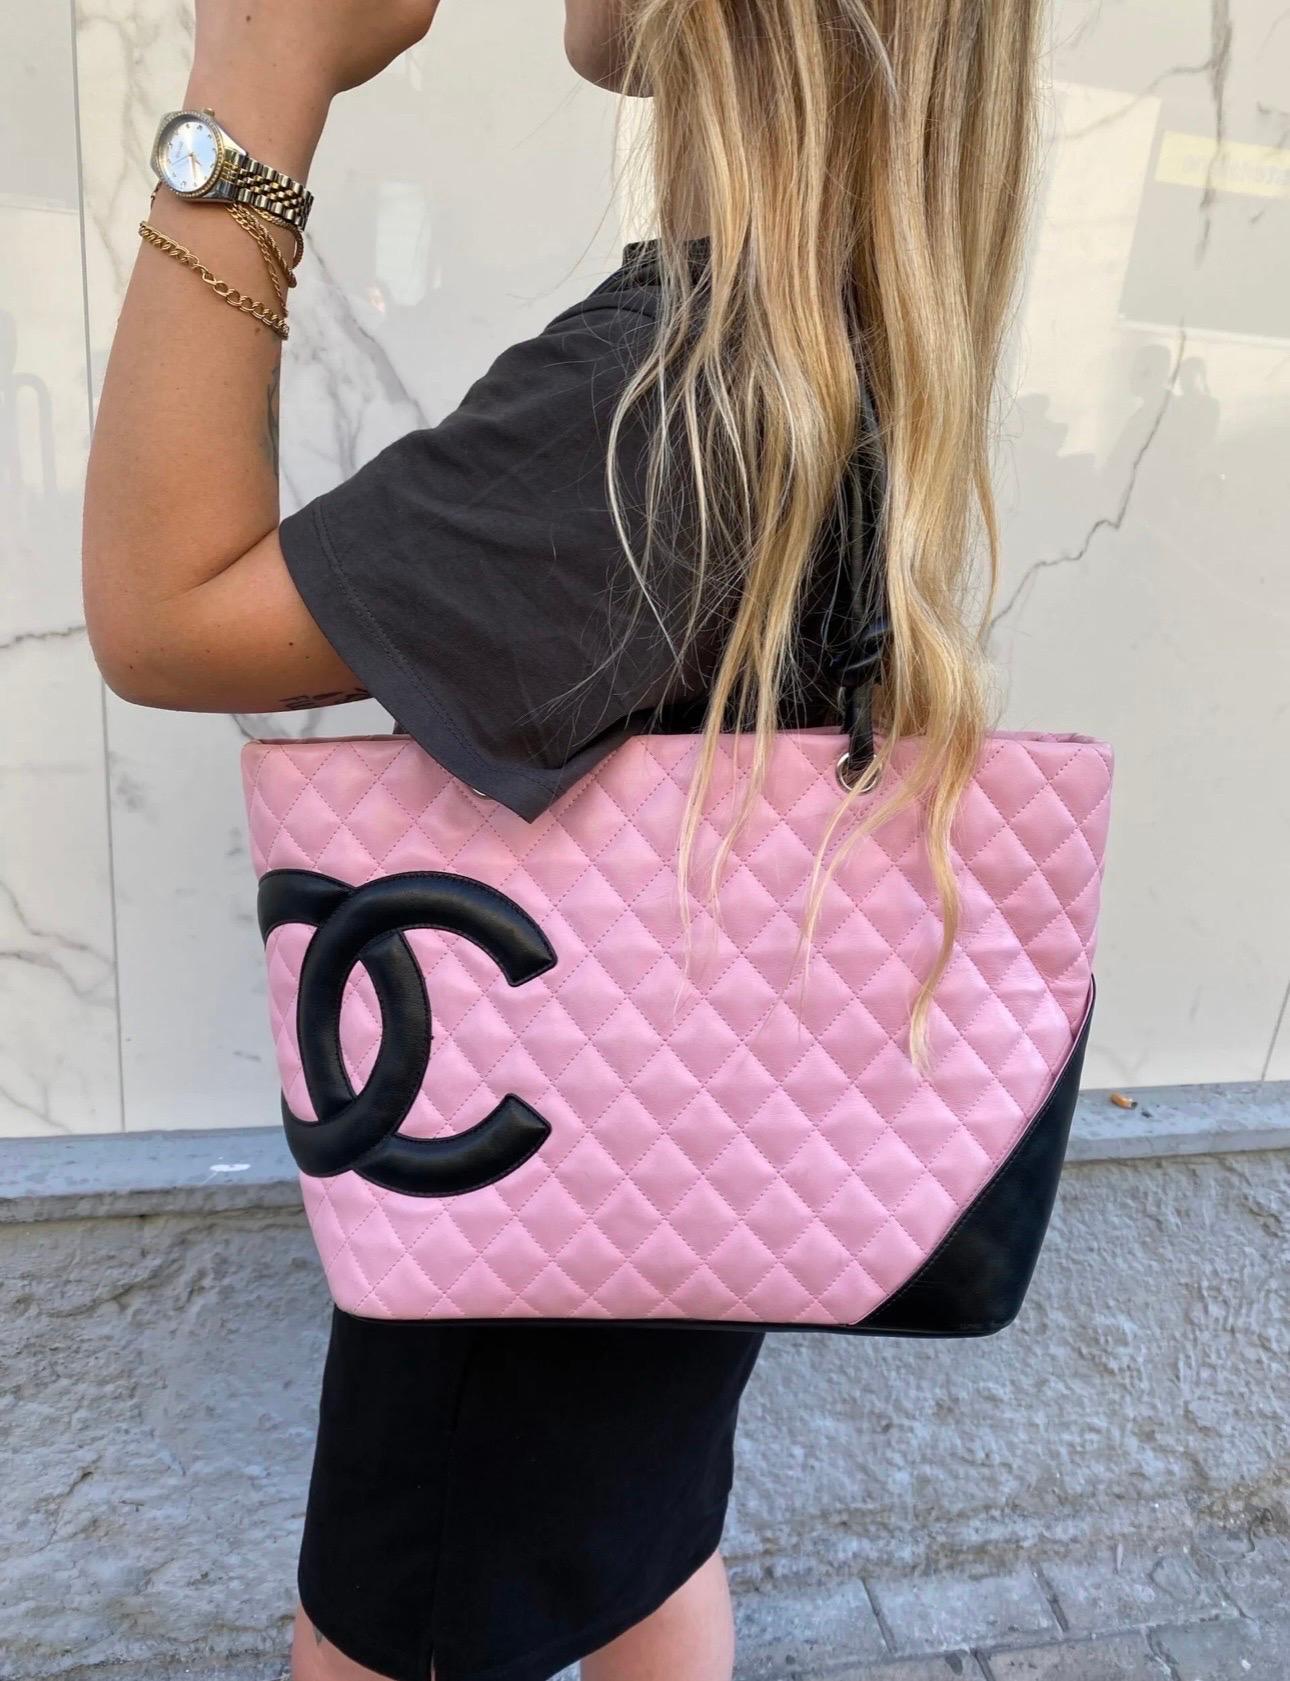 Chanel Cambon edition handbag in pink and black quilted leather with silver-tone hardware. It has a central opening with zip closure. The interior is lined with a soft black fabric and is equipped with two internal pockets, both with zip closure.